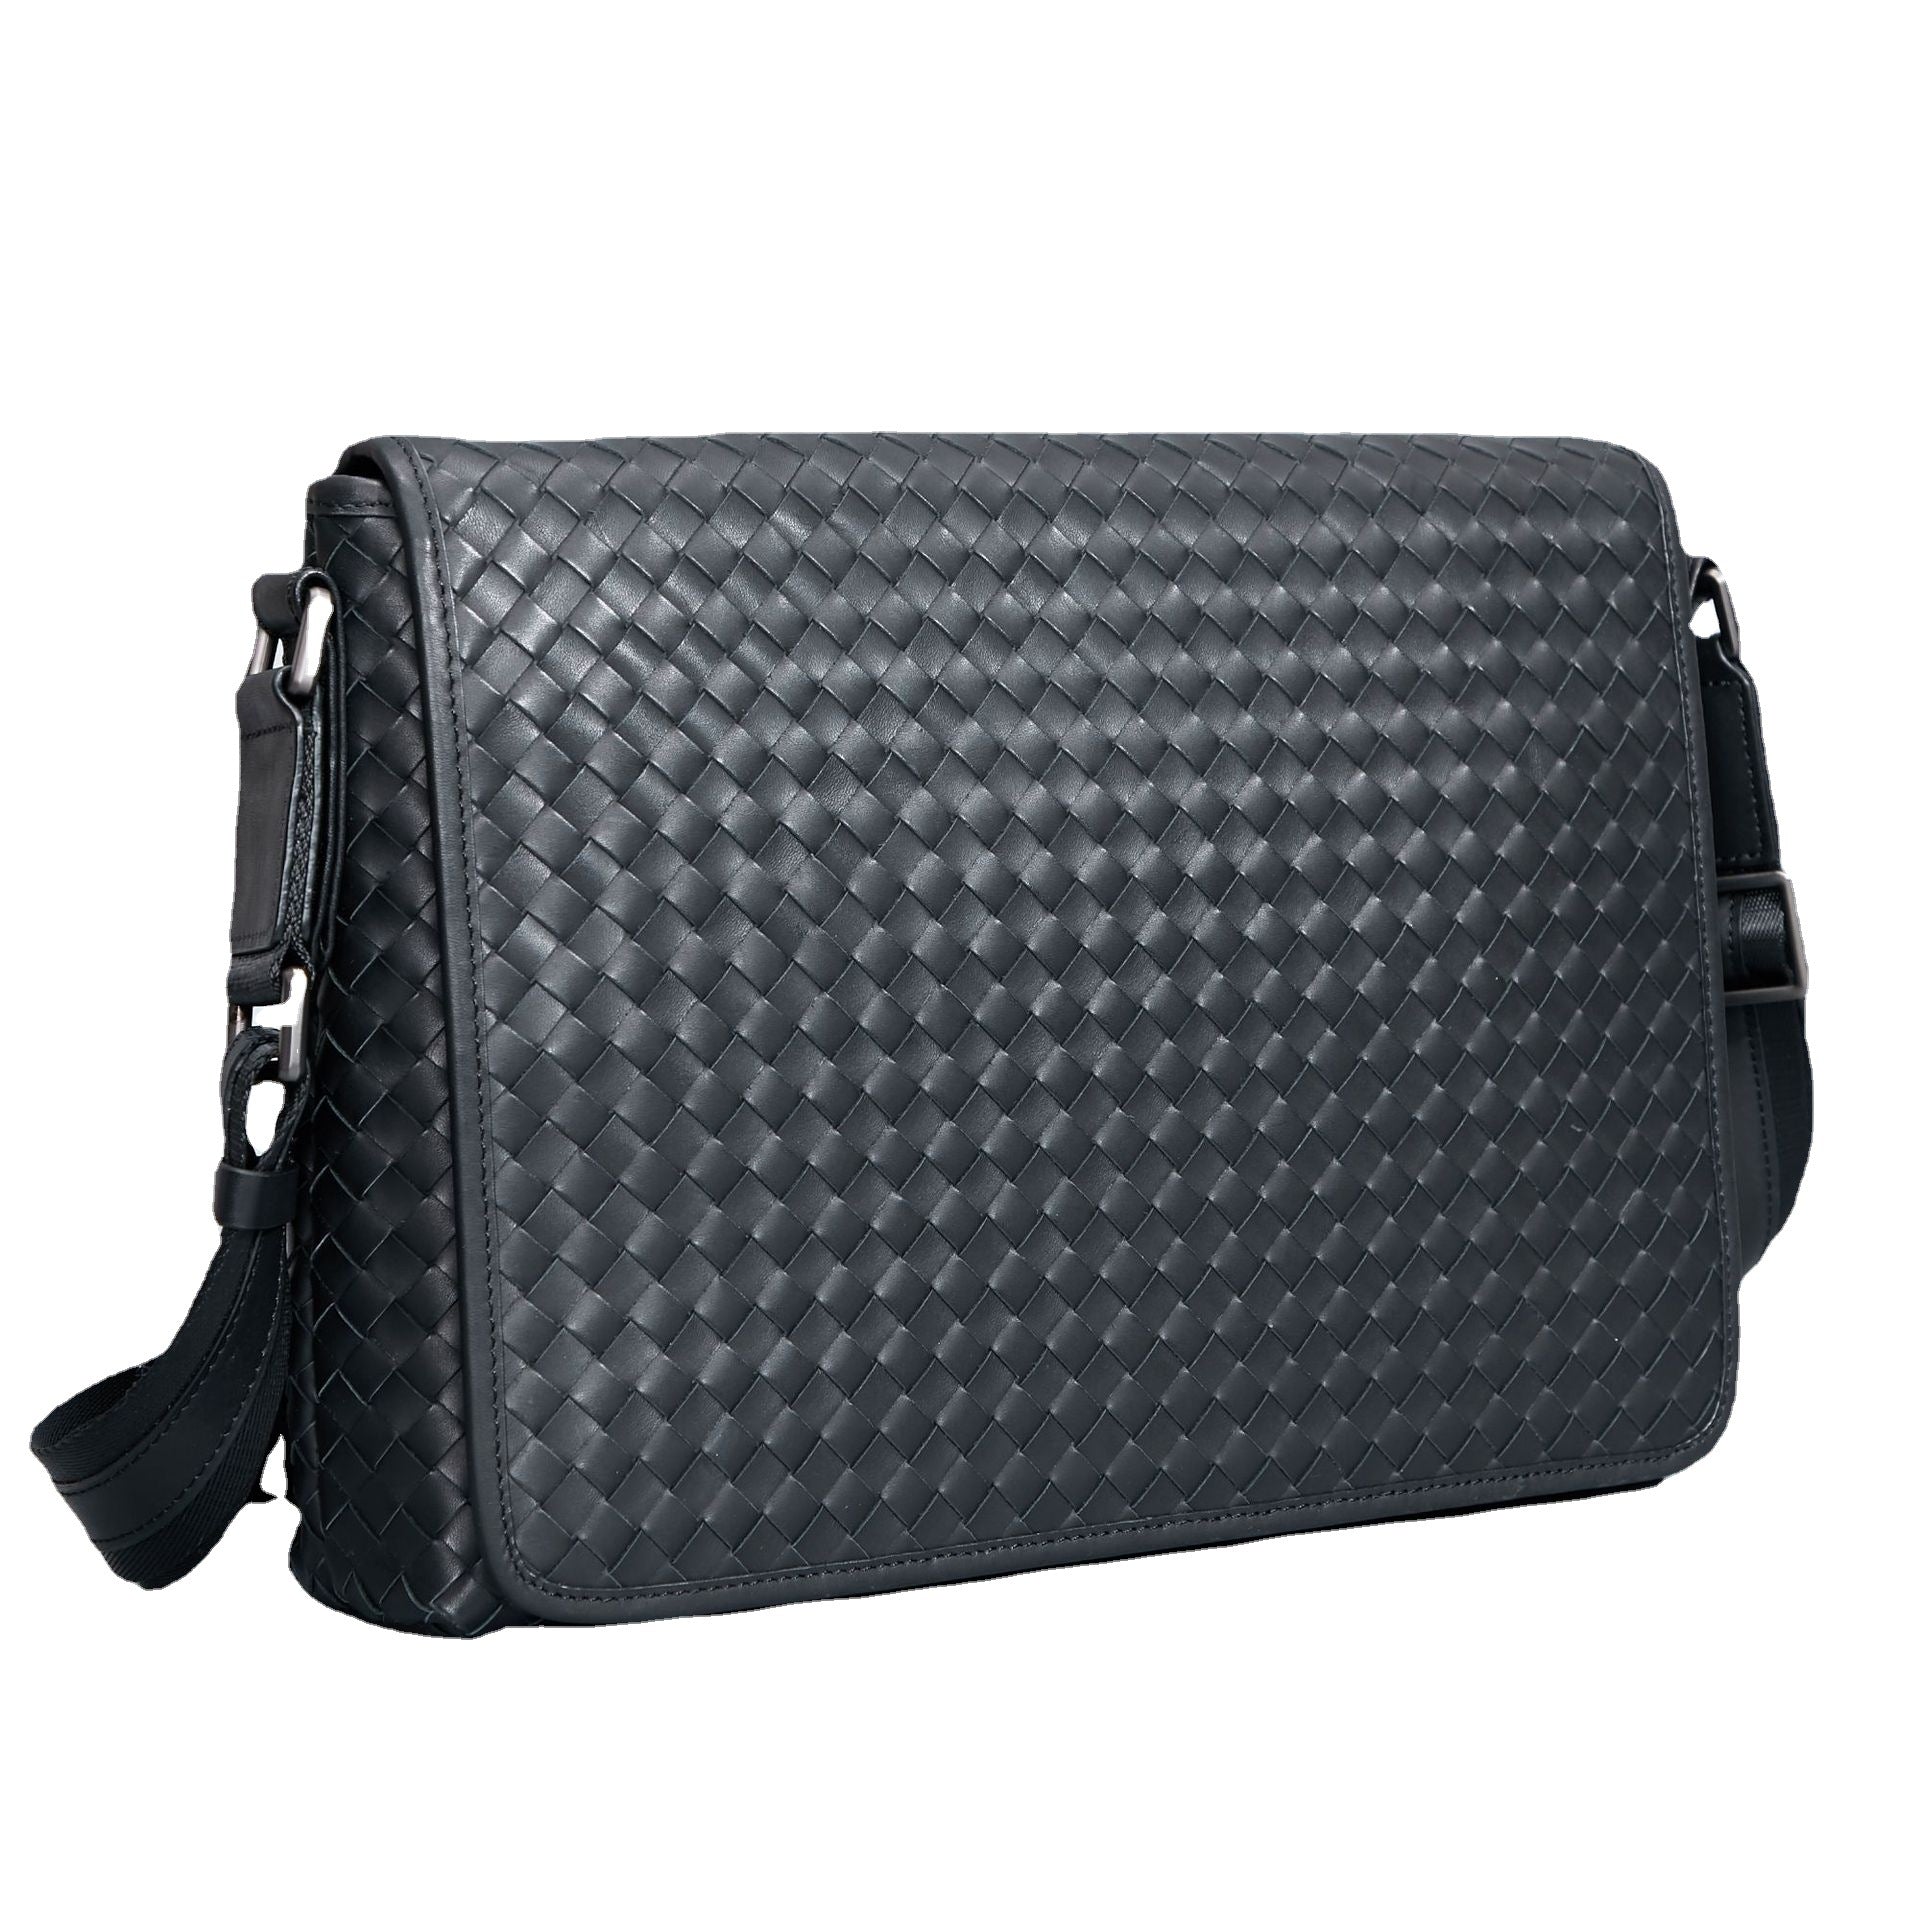 Men's Business Casual Leather Woven Messenger Bag